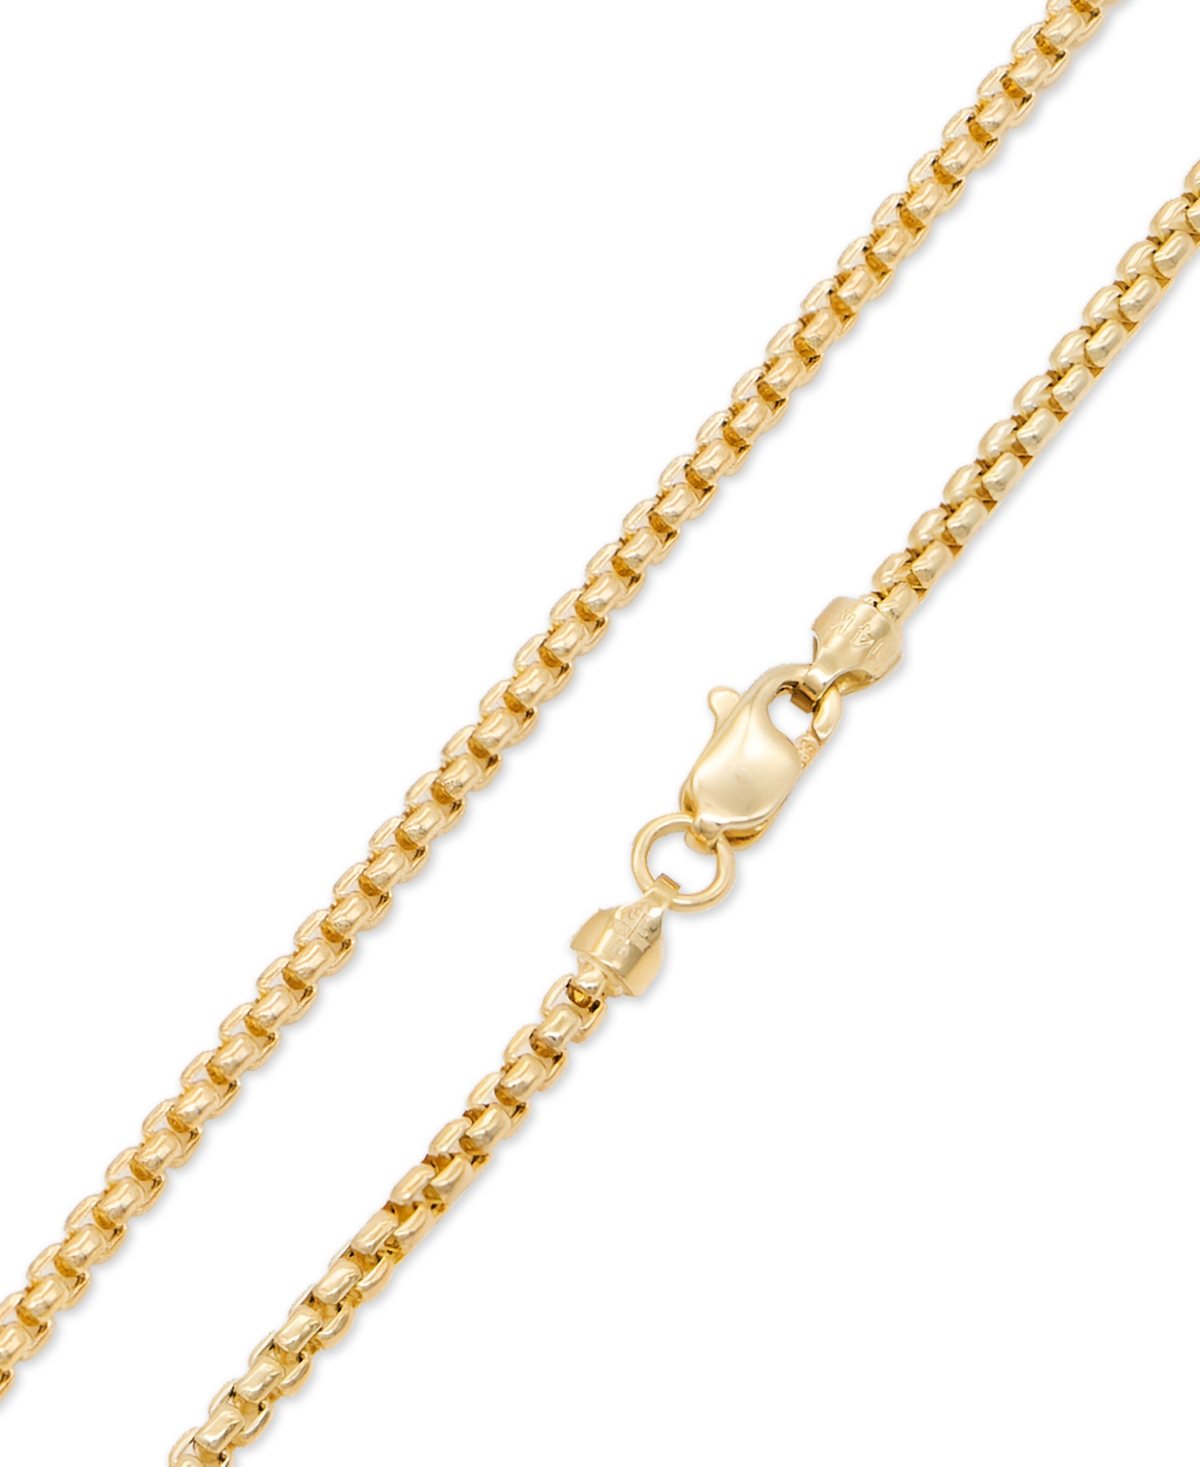 14K Gold Box Round 2mm Chain Bracelet, 7.5", approx. 1.9grams - Gold